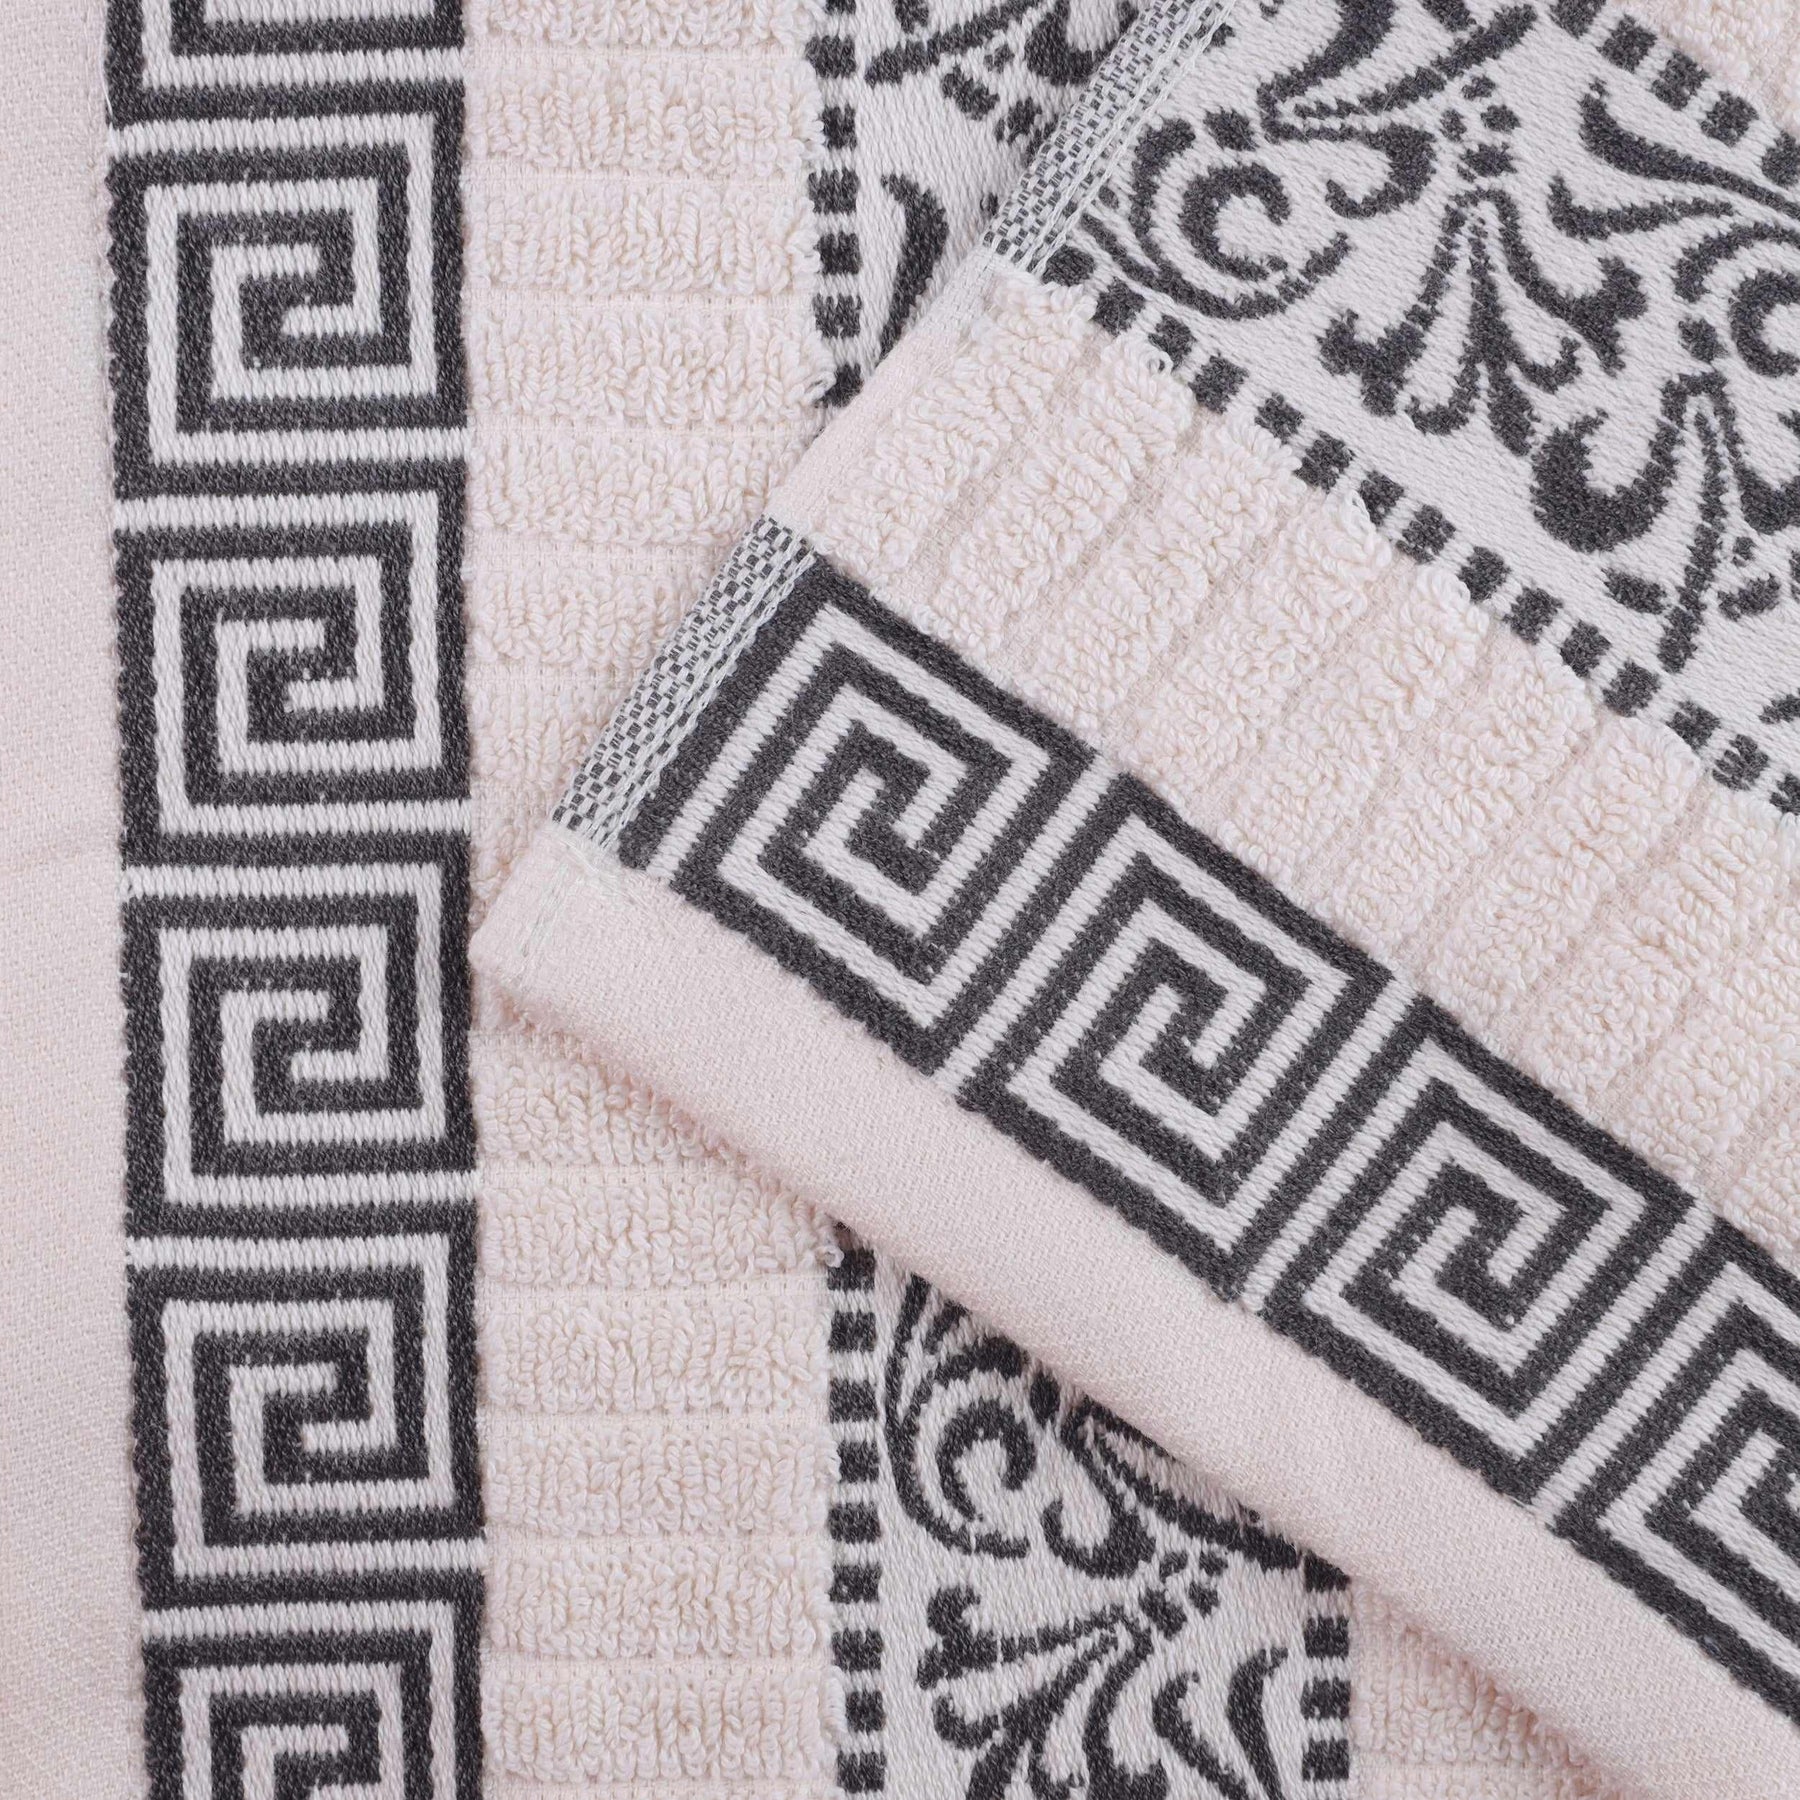 Superior Athens Cotton 8-Piece Towel Set with Greek Scroll and Floral Pattern - Ivory-Grey